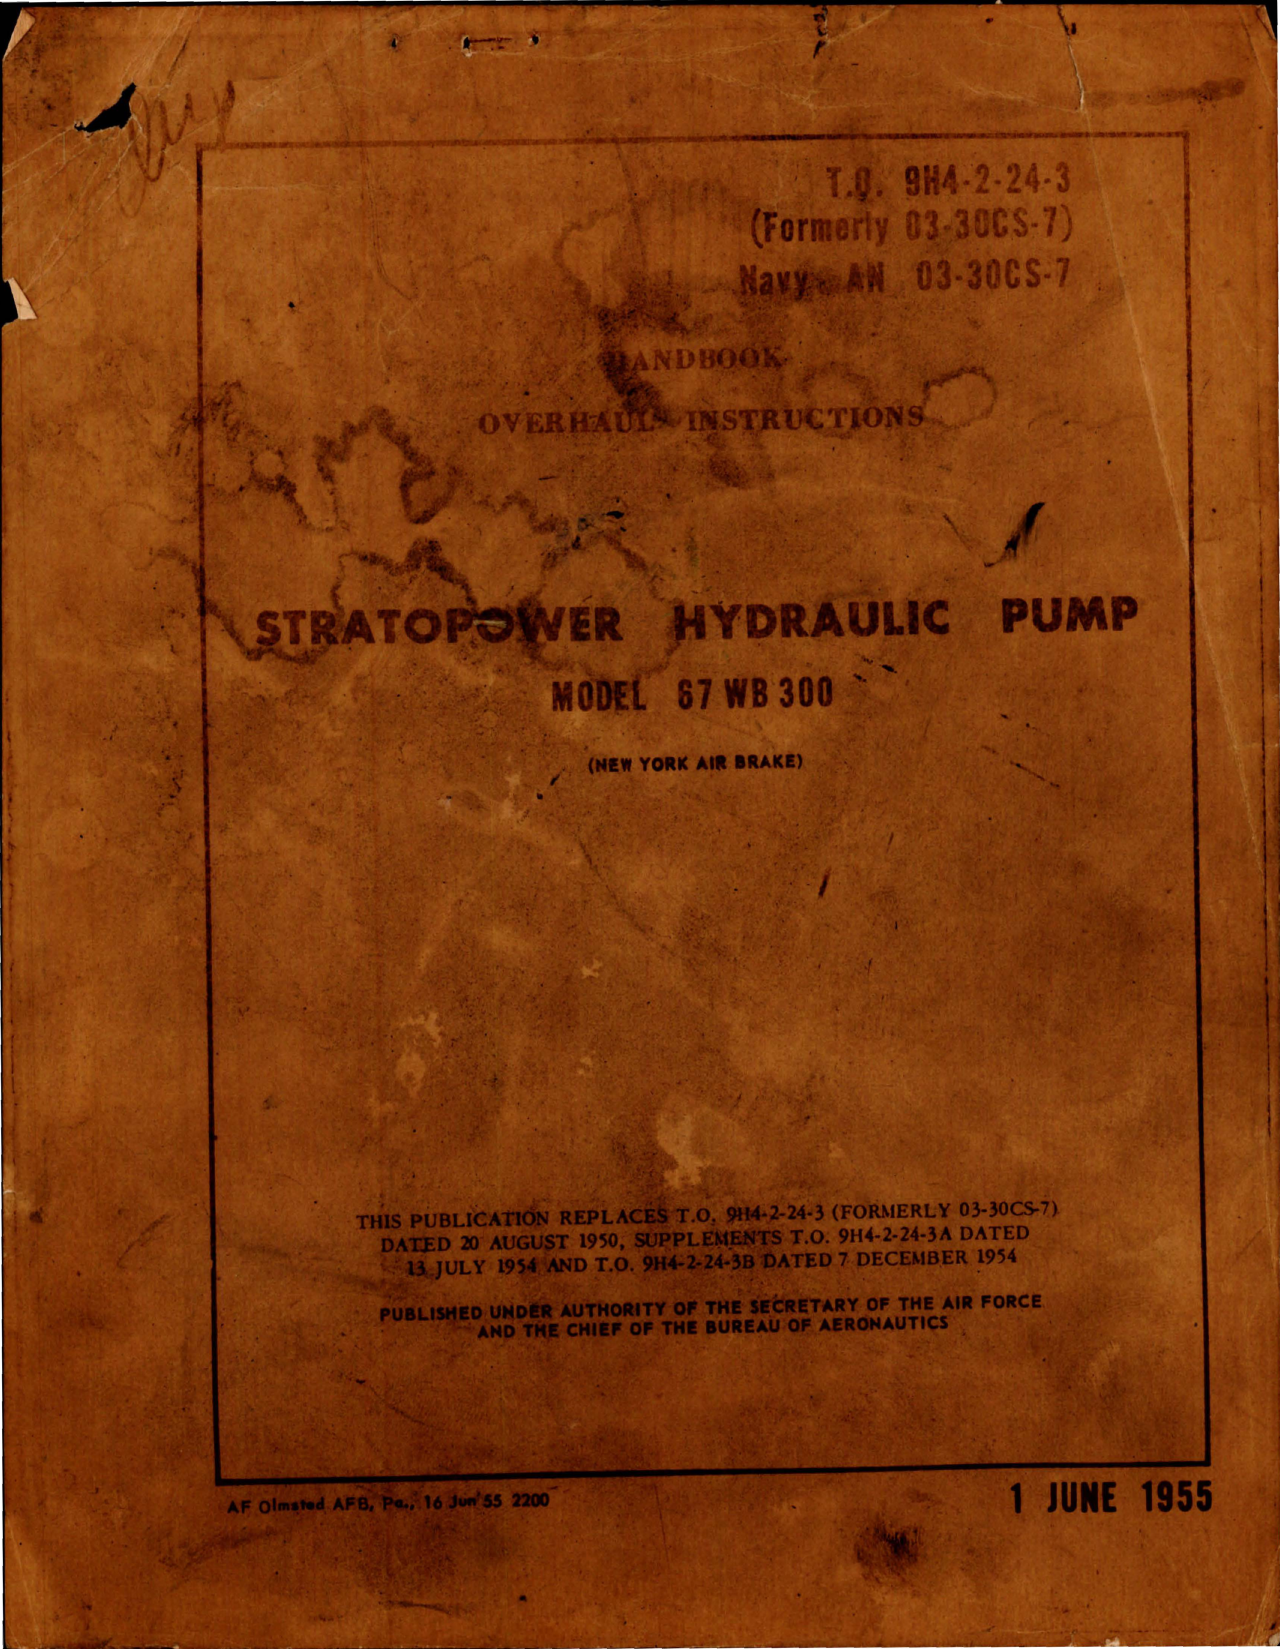 Sample page 1 from AirCorps Library document: Overhaul Instructions for Stratopower Hydraulic Pump - Model 67 WB 300 